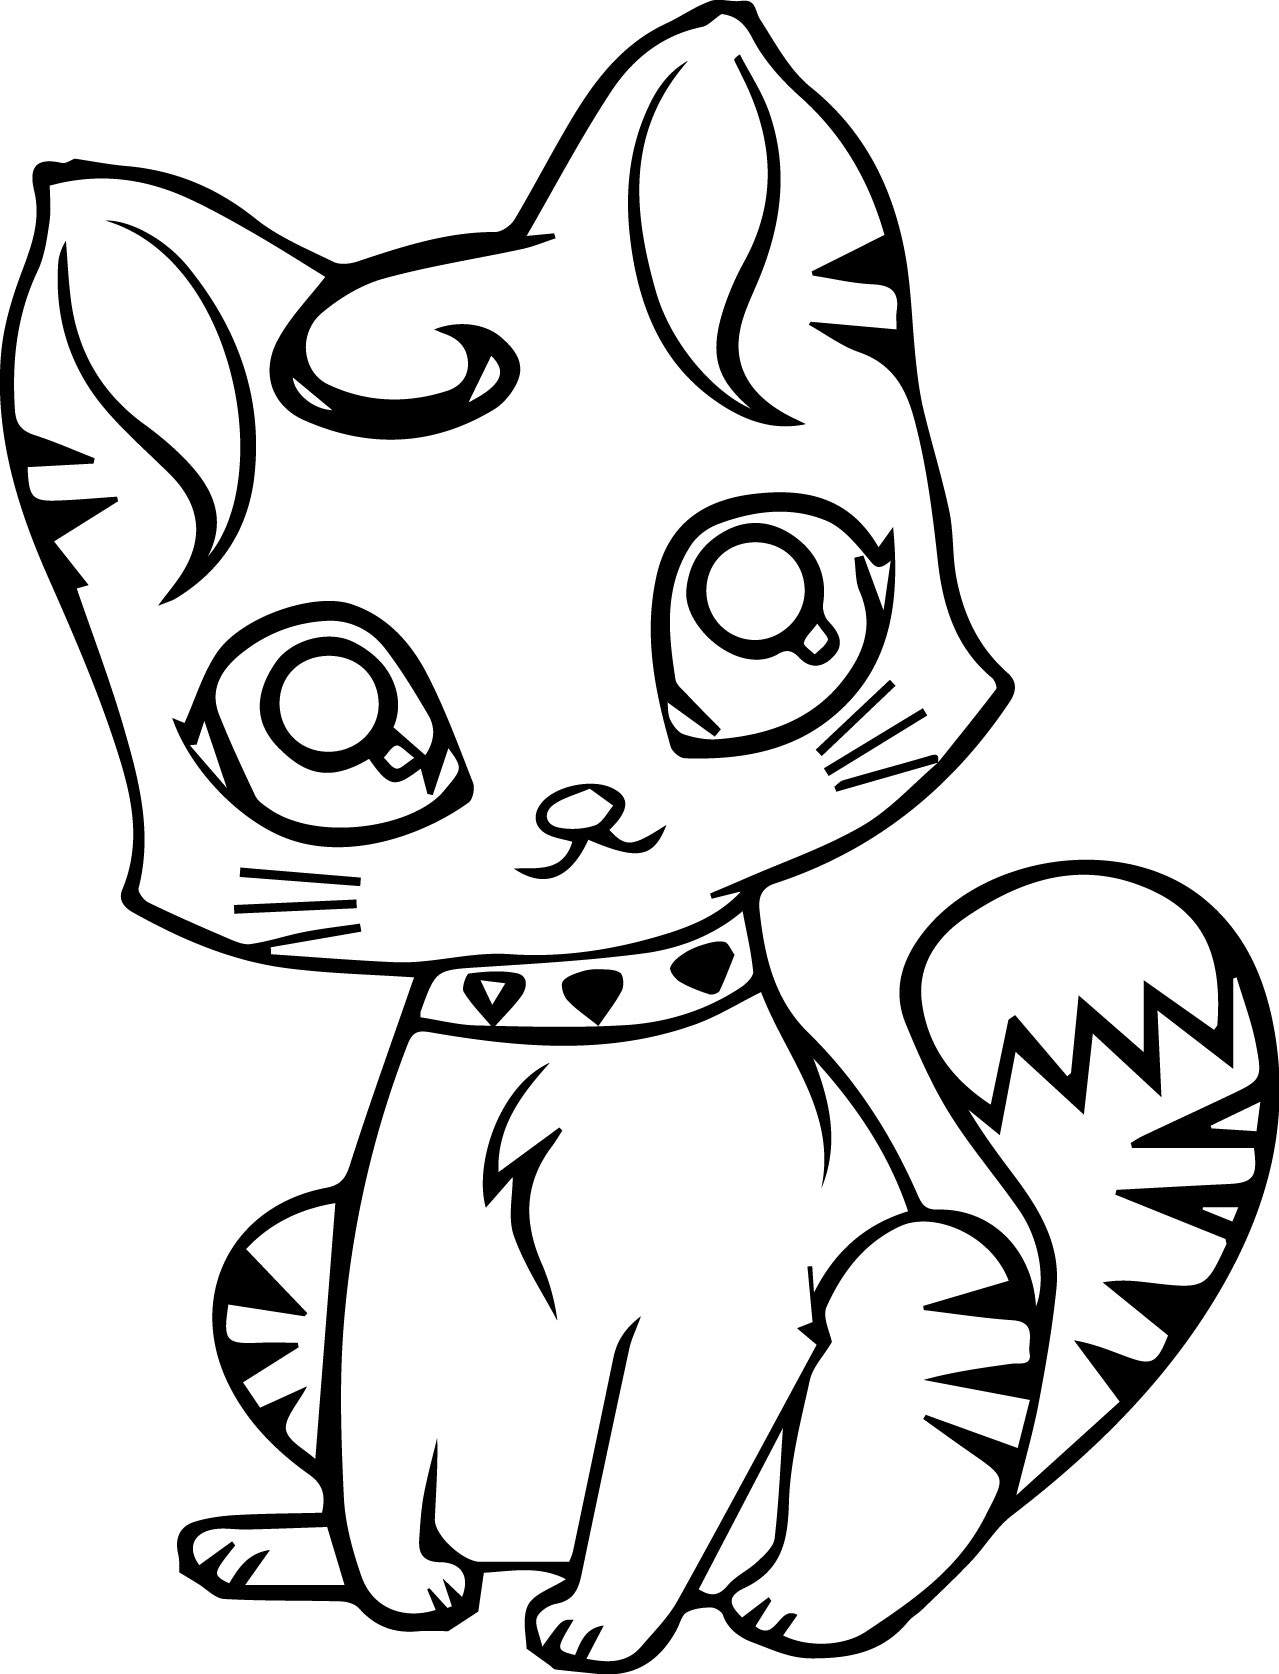 Sleeping Cat Coloring Pages at GetColorings.com | Free ...